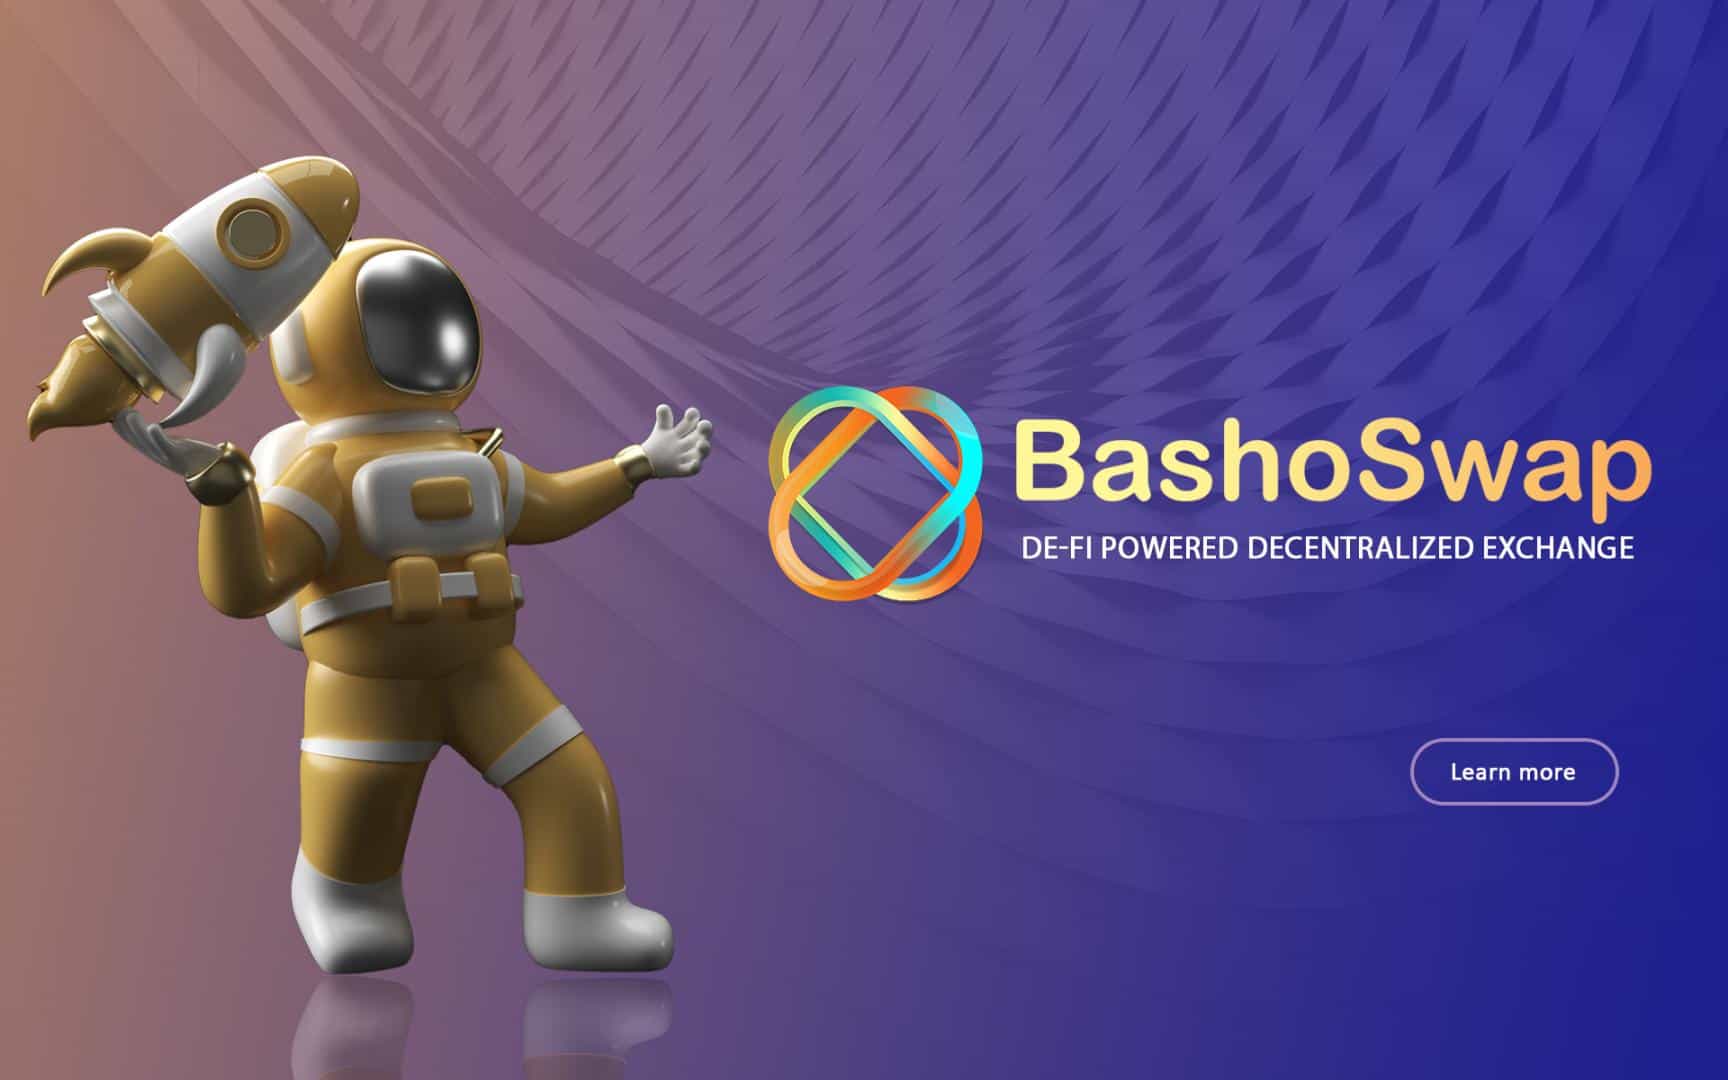 Bashoswap-readies-for-ama-on-cardanodaily-ahead-of-bash-initial-sale-round